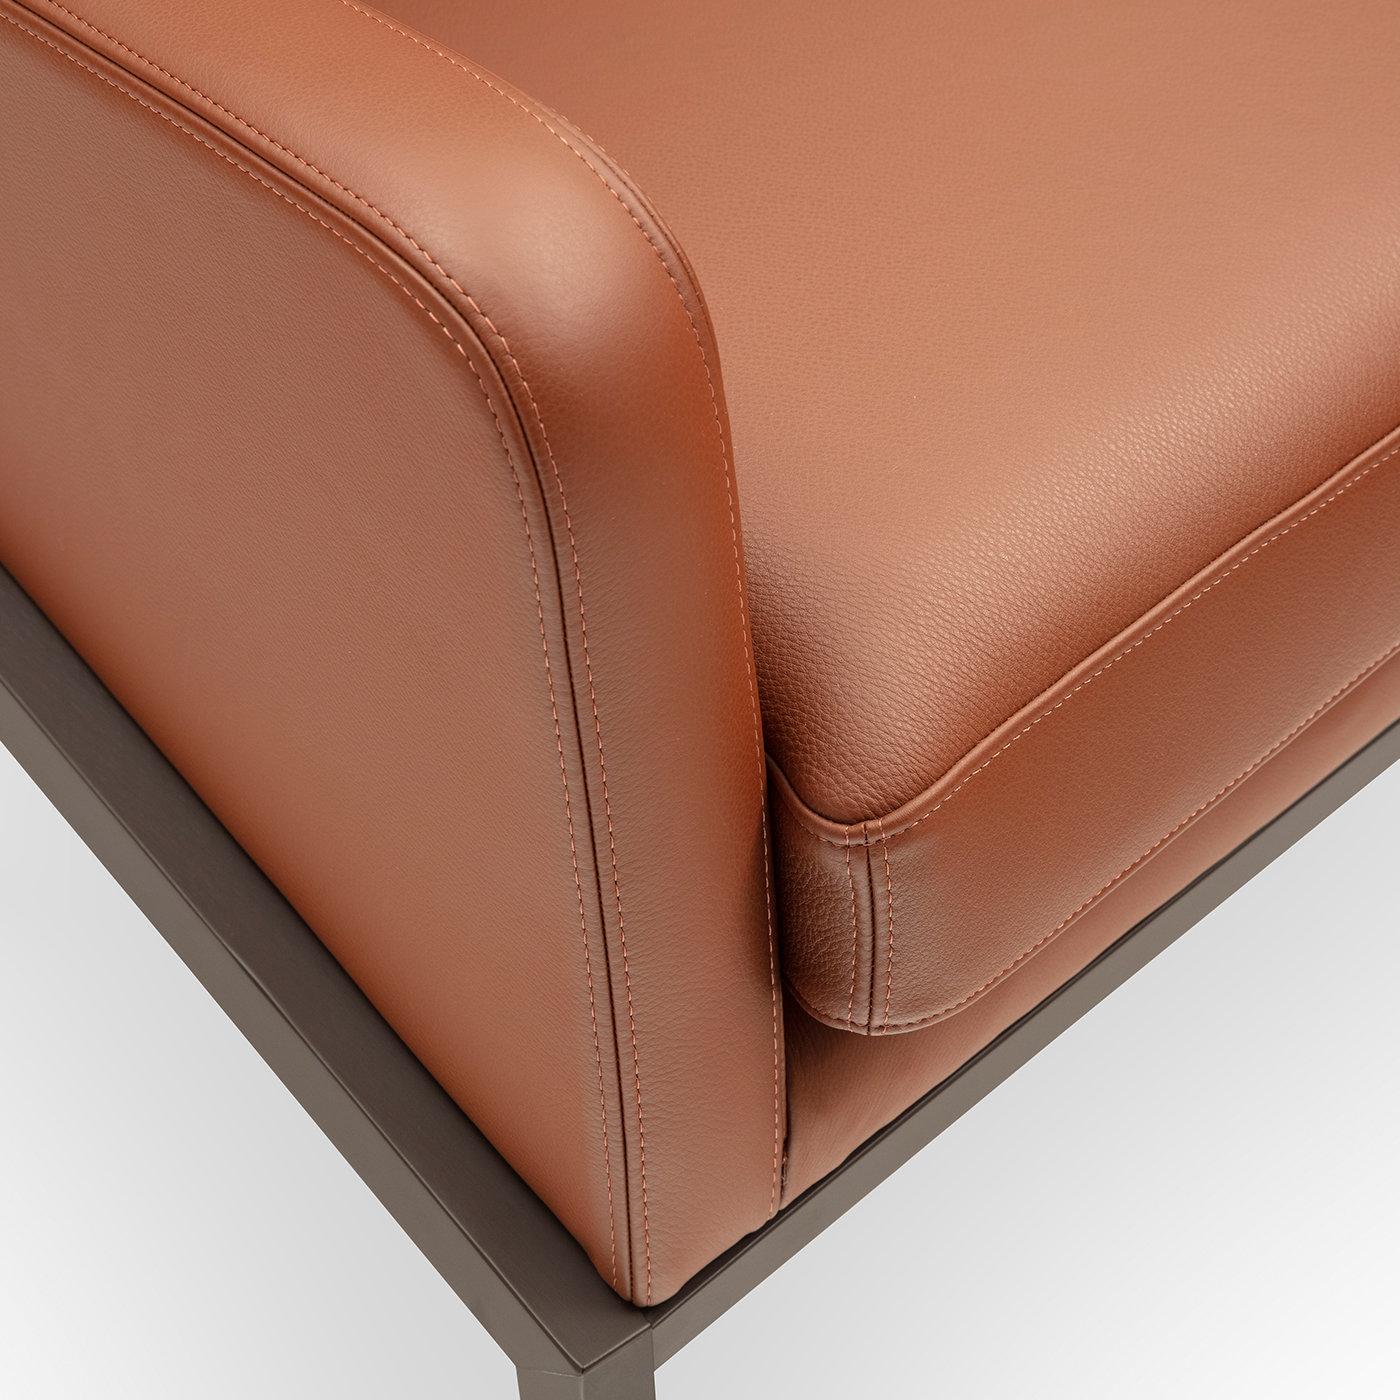 Defined by sculpted volumes tracing a dynamic silhouette, this sophisticated armchair covered in prized brown leather will be ideally displayed in studies or homes with a neutral color palette. The generously padded silhouette ensures great comfort,